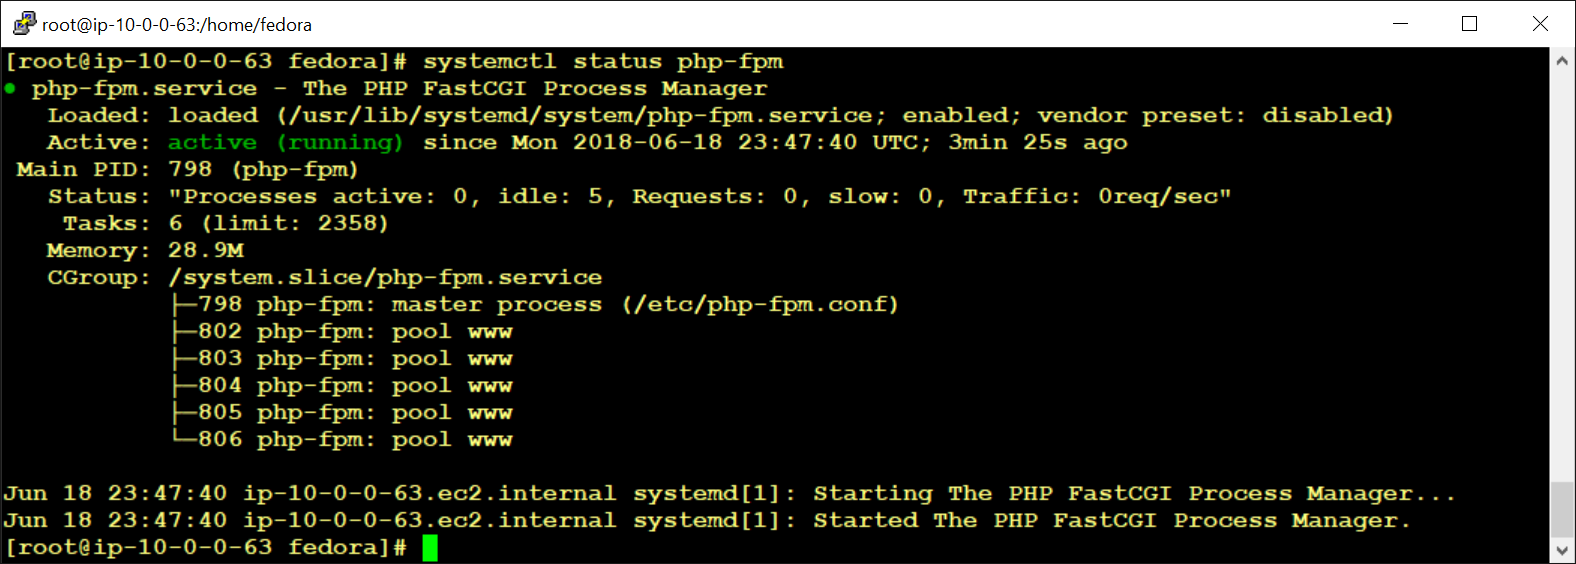 Output of the command systemctl status php-fpm from Remi repo on Fedora 28